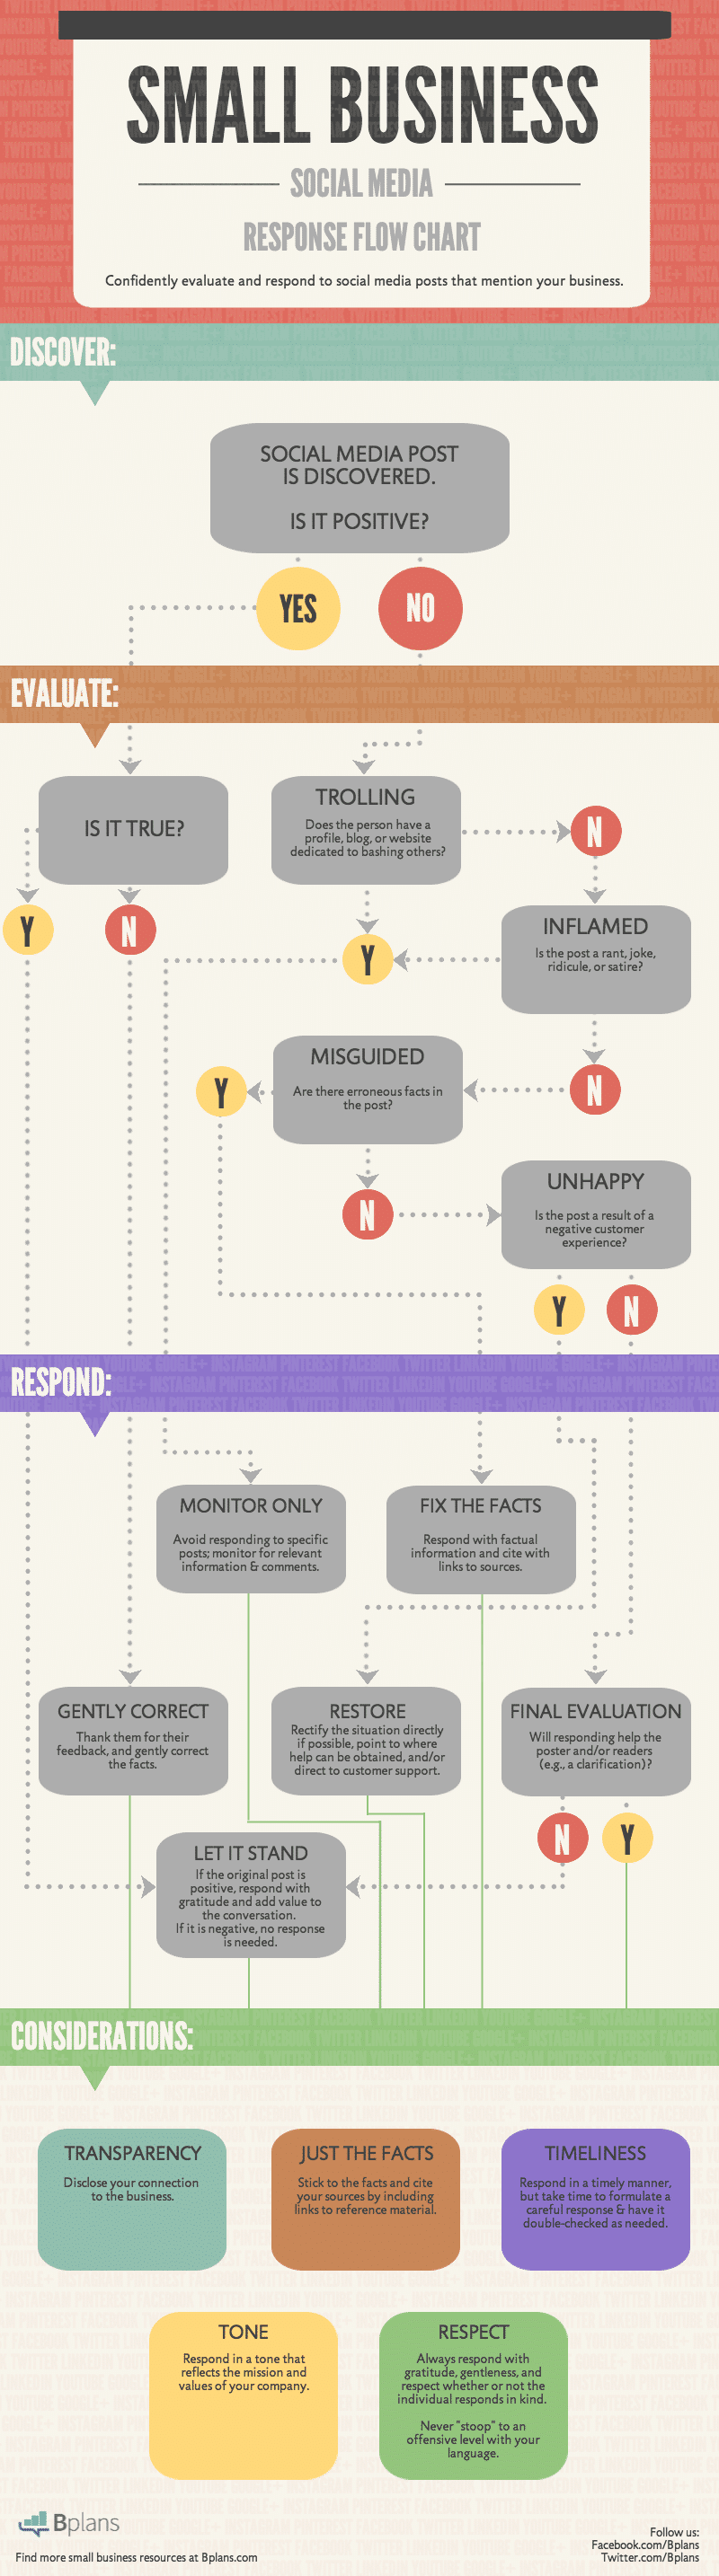 How To Respond On Social Media Infographic